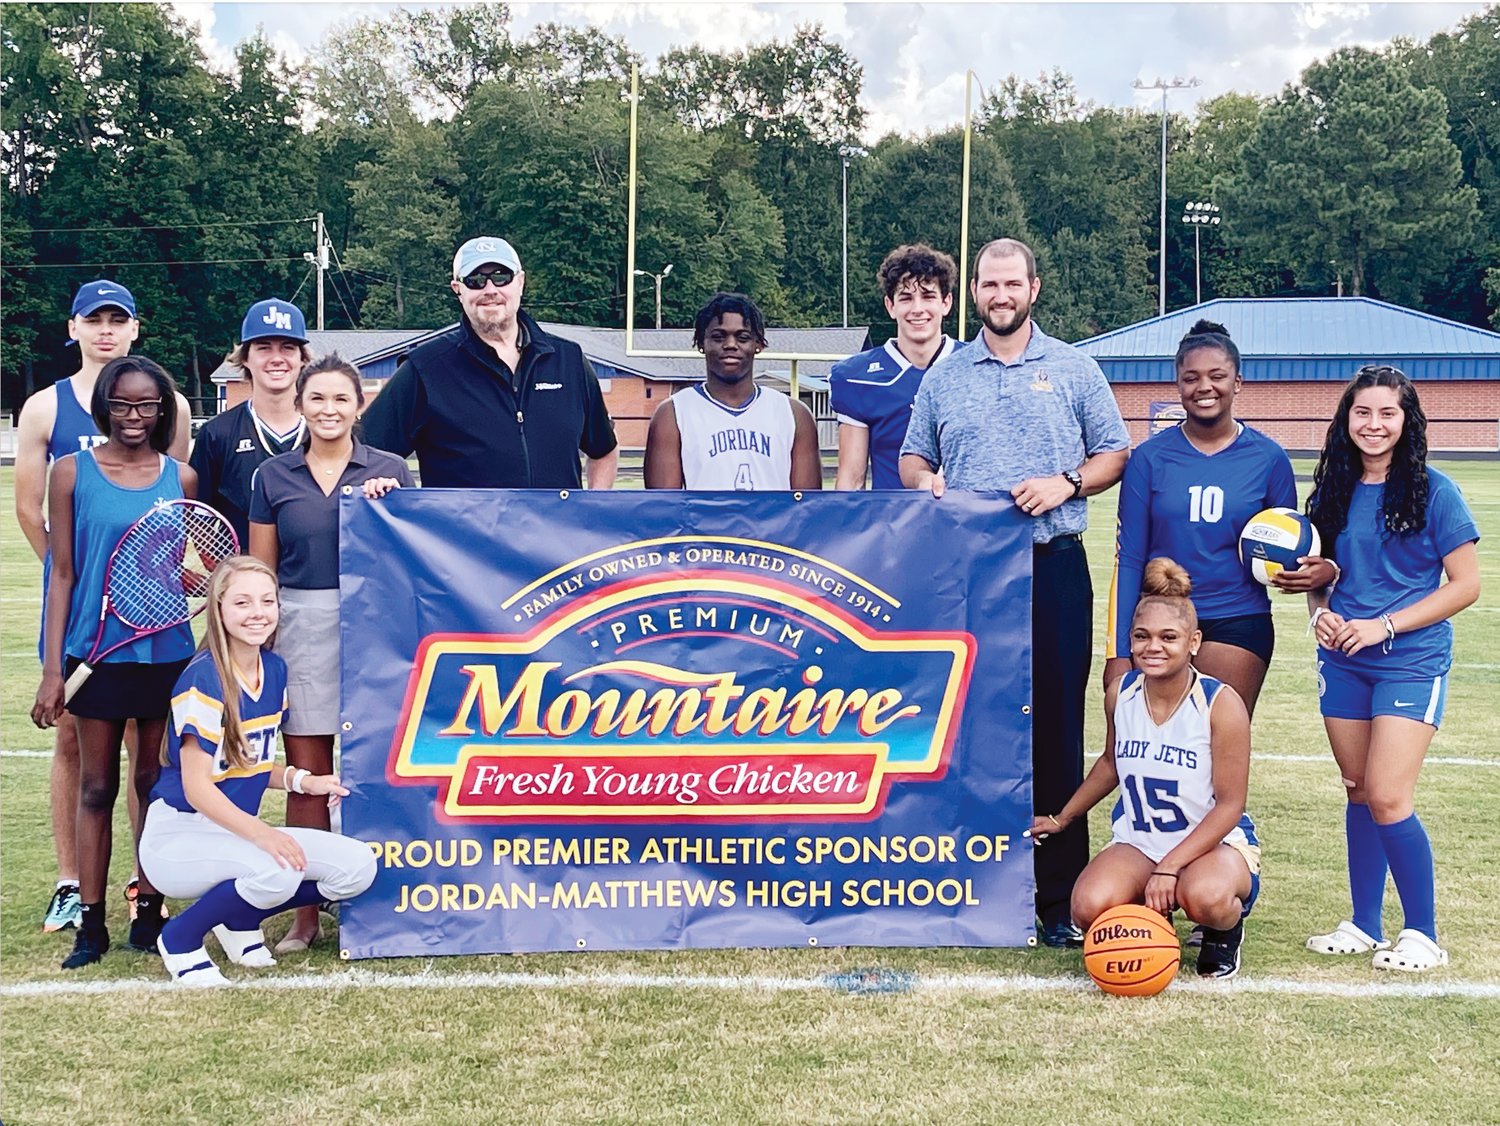 Mountaire's Sasha Duncan (holding banner, left) and Carl Barnes (beside Duncan) pose with Jordan-Matthews Athletic Director Josh Harris and athletes. Mountaire has become a premier sponsor of J-M's sports teams.